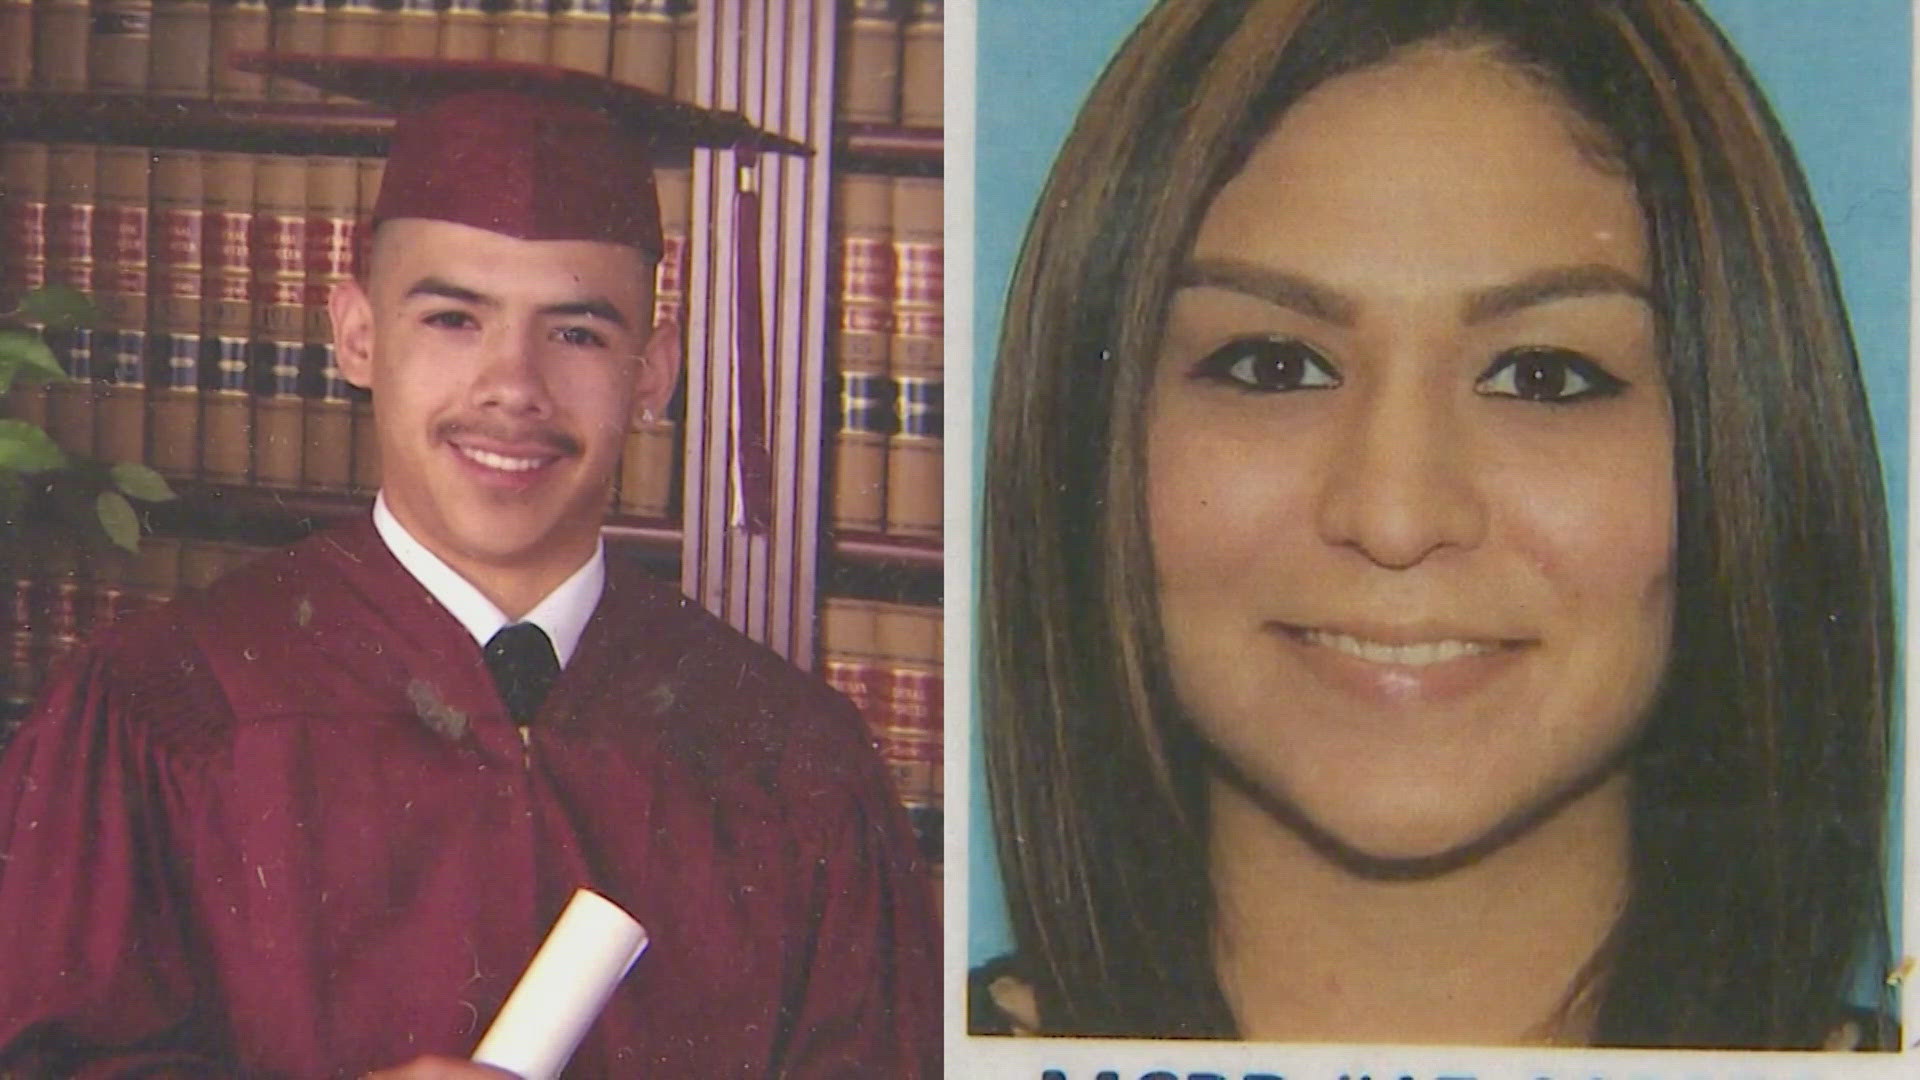 Robert Cerda and his girlfriend, Rachel Delarosa, were out on a date at Connie's restaurant in the Spring Branch area before they were killed.